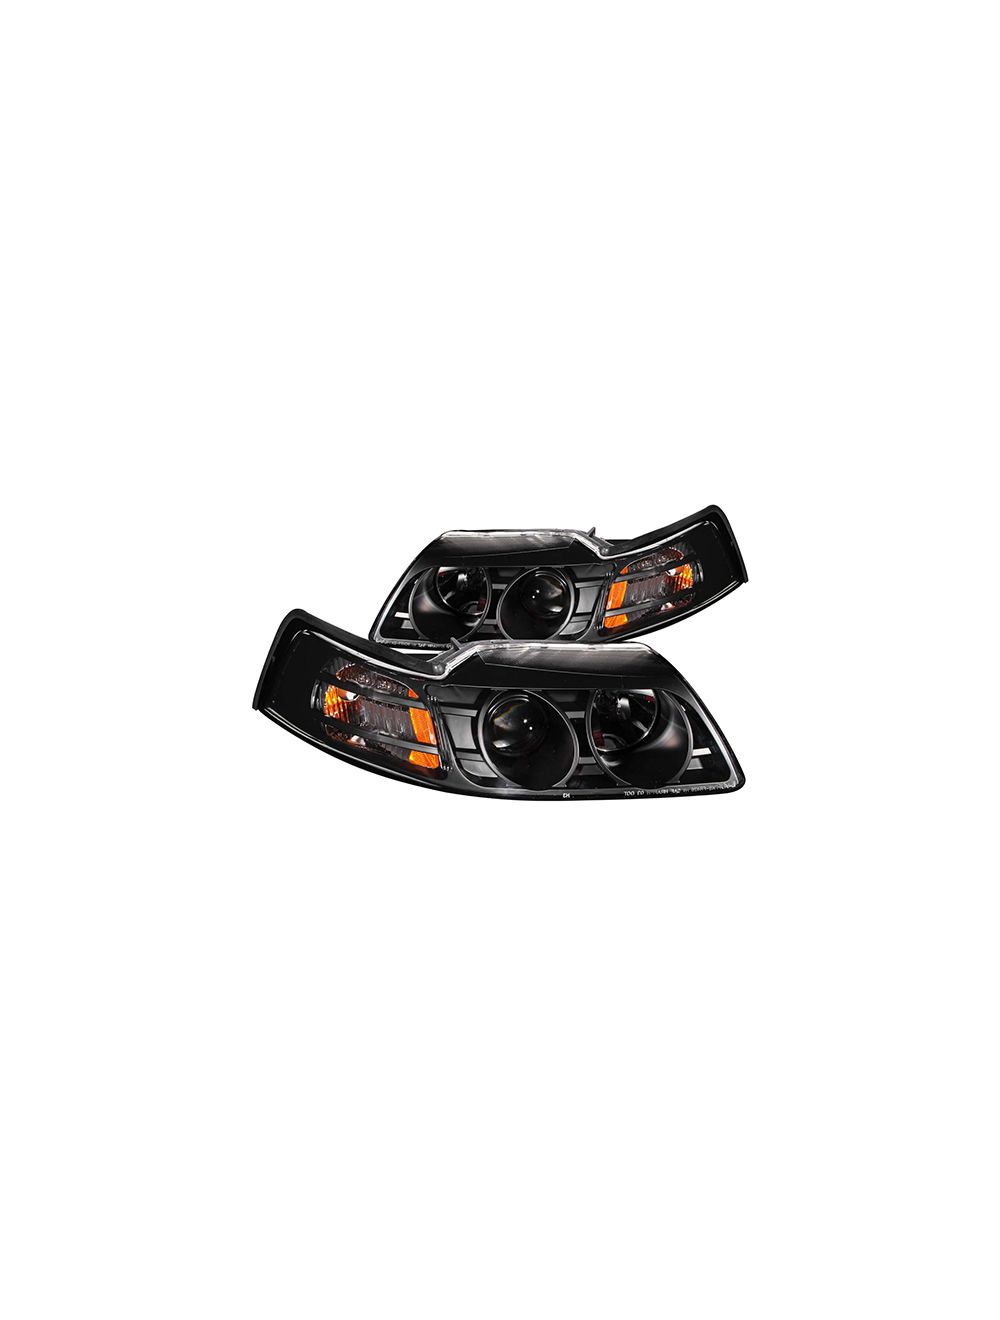 Anzo ANZ121042 Projector Black  Headlights for Ford 1999 - 2004 Mustang